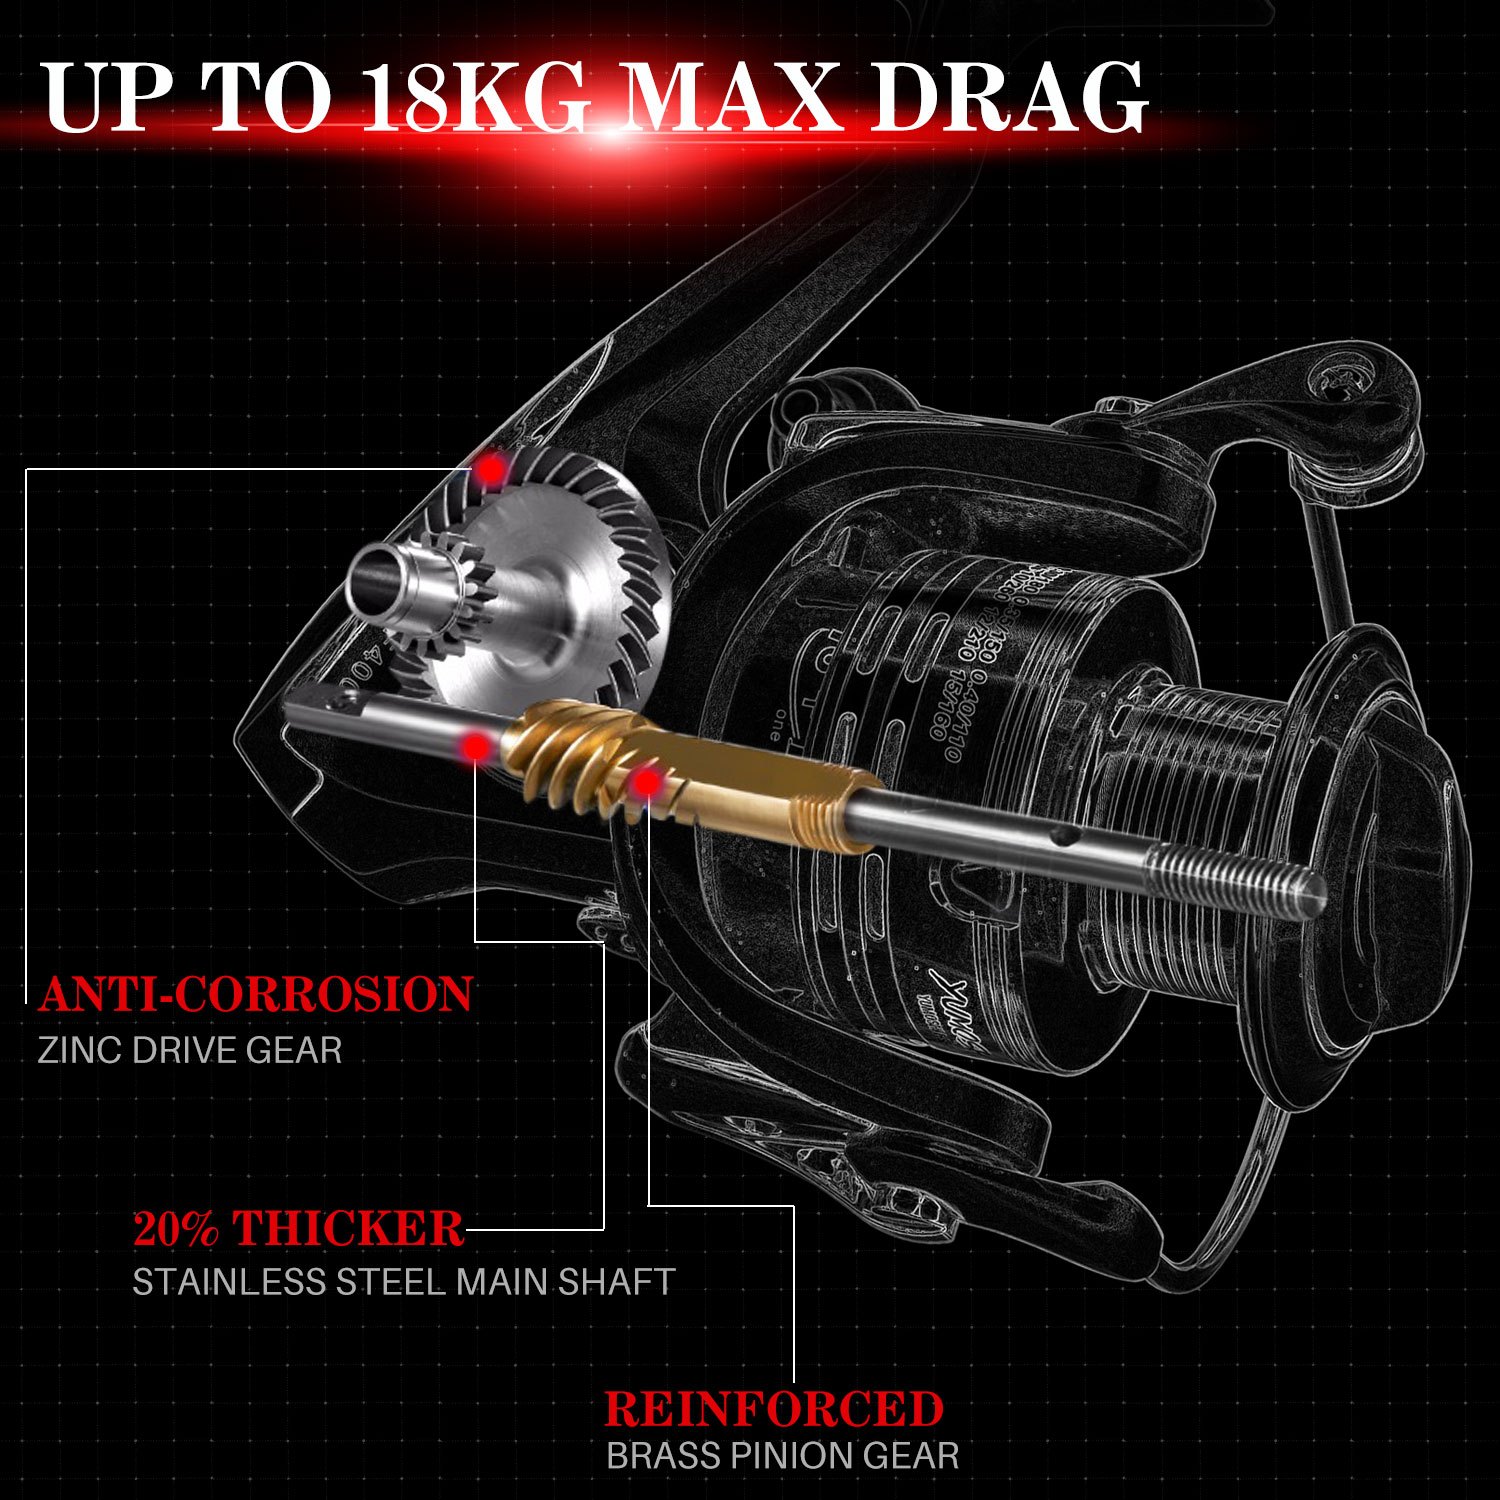 Sougayilang Fishing Reel 13+1BB Light Weight Ultra Smooth Aluminum Spinning  Fishing Reel with Free Spare Graphite Spool XY2000